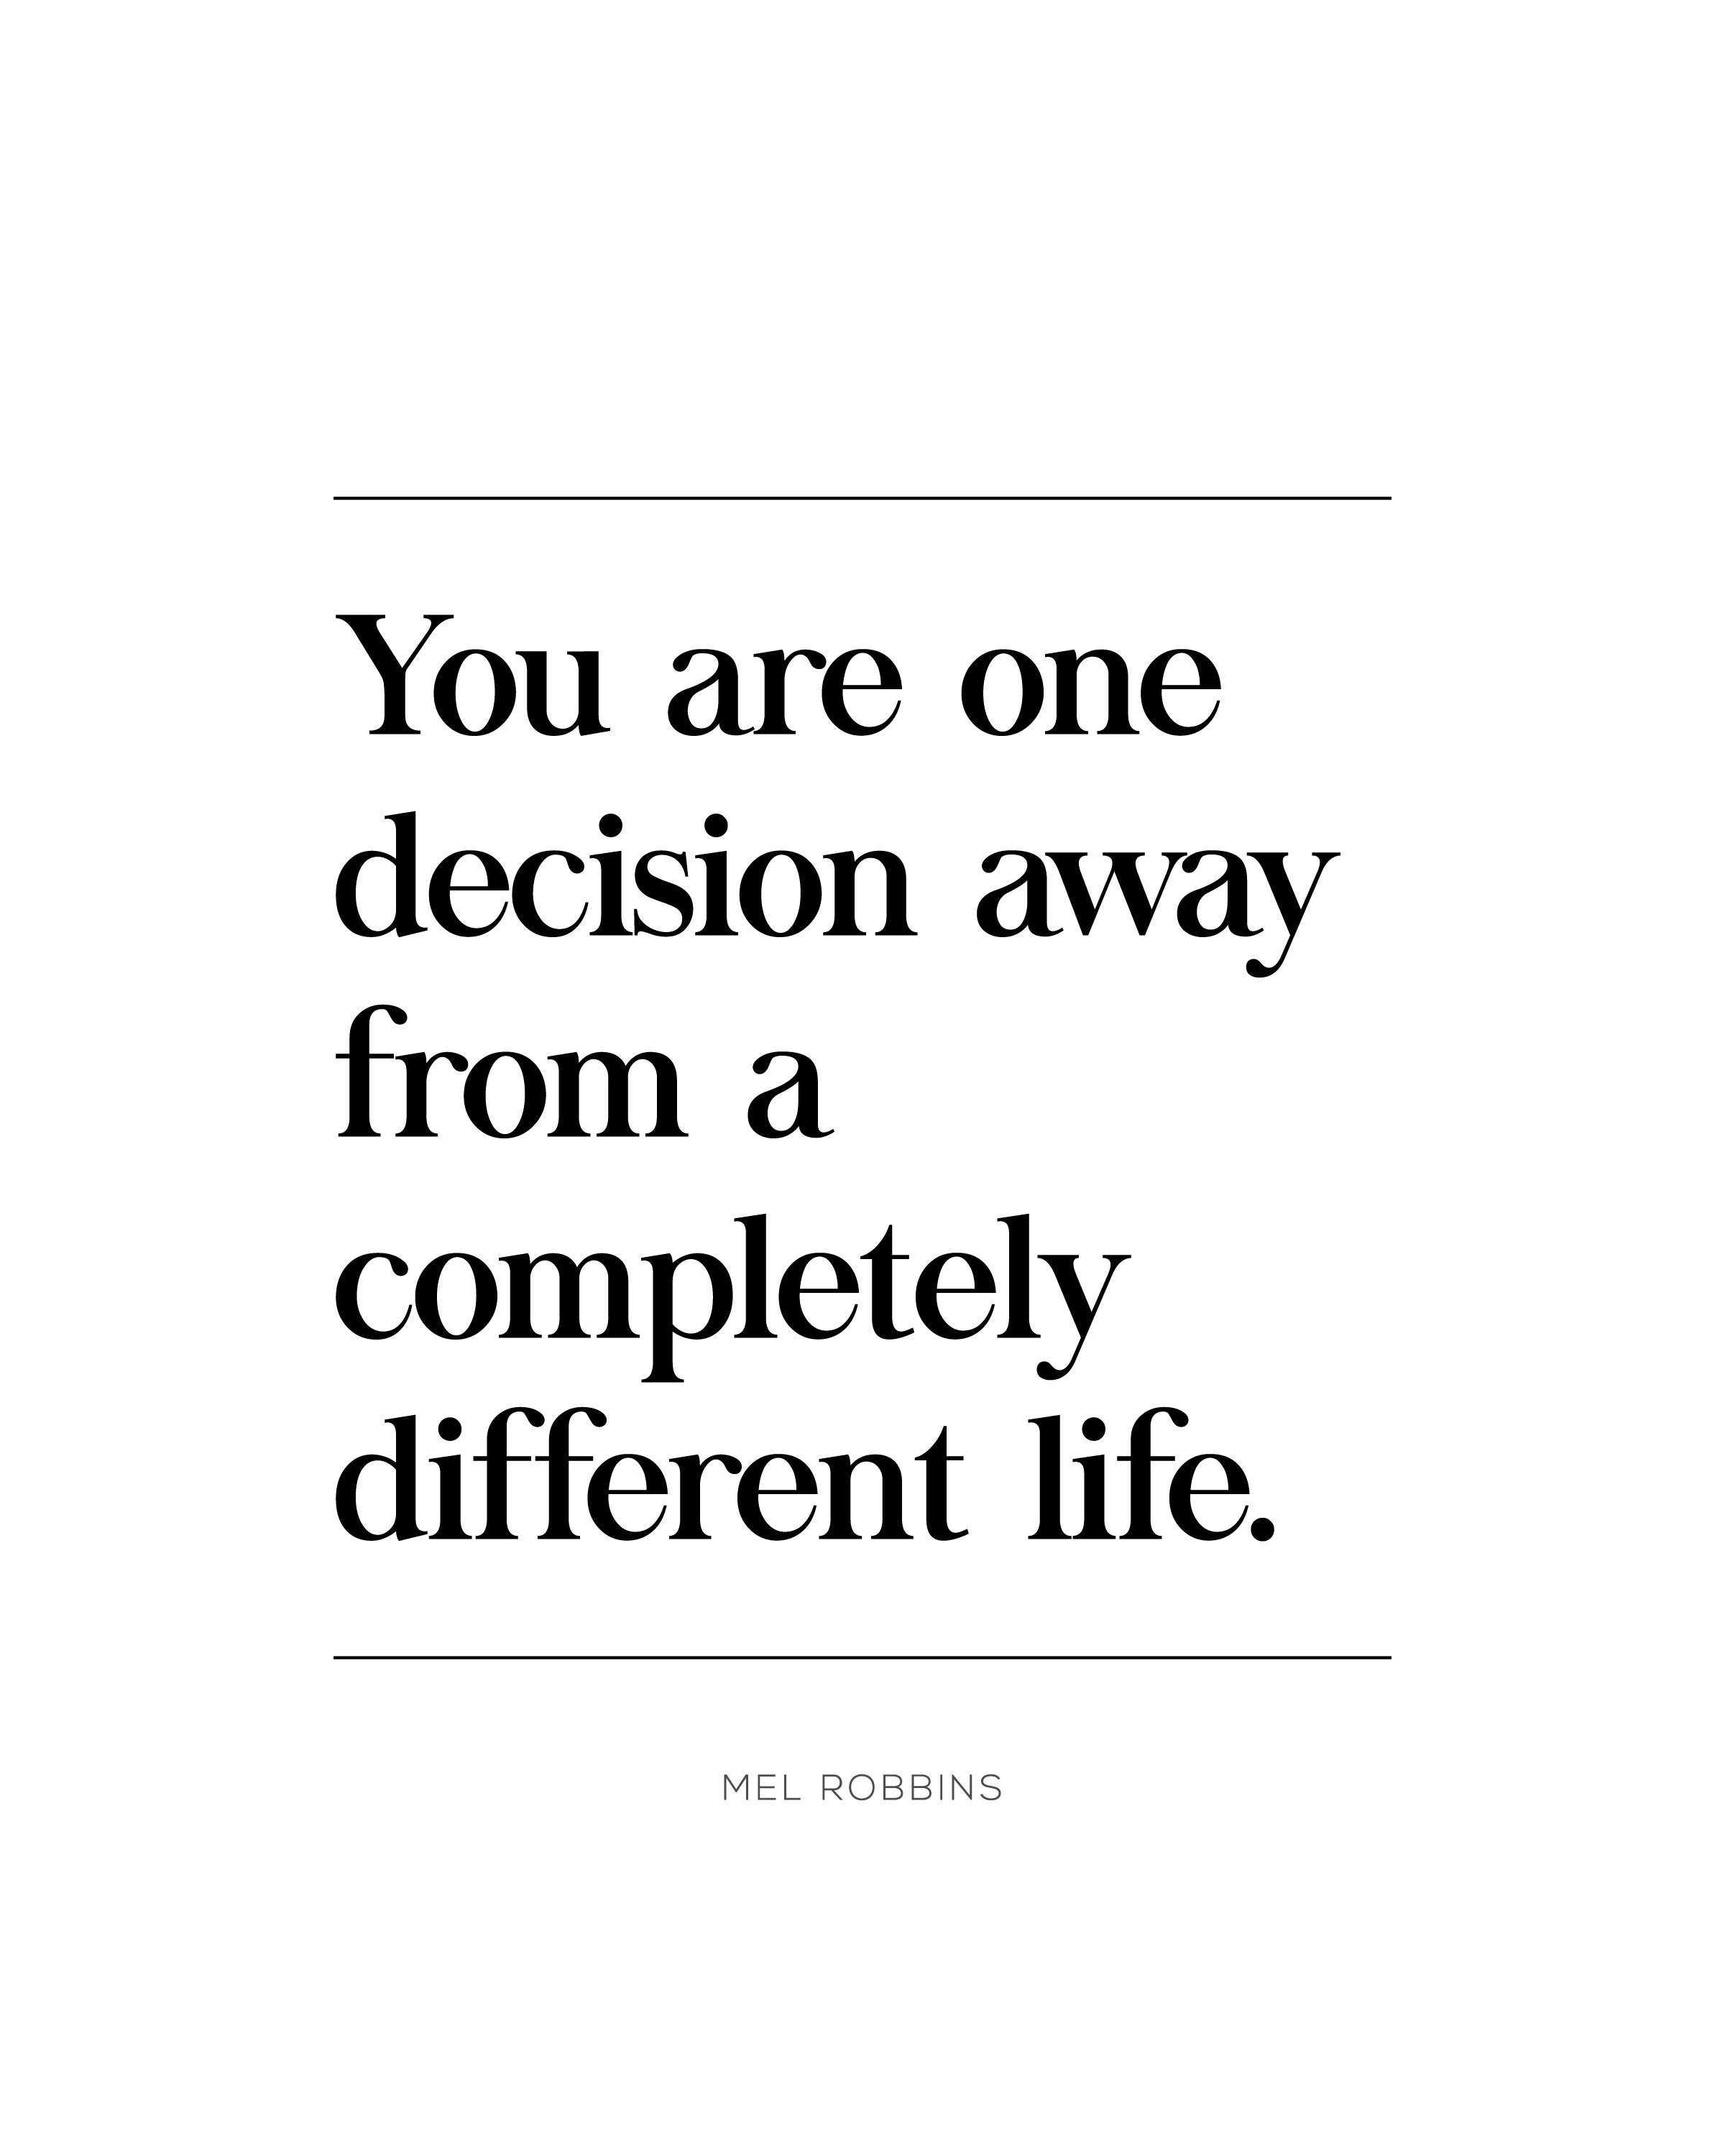 The life you want is two decisions & two actions away.